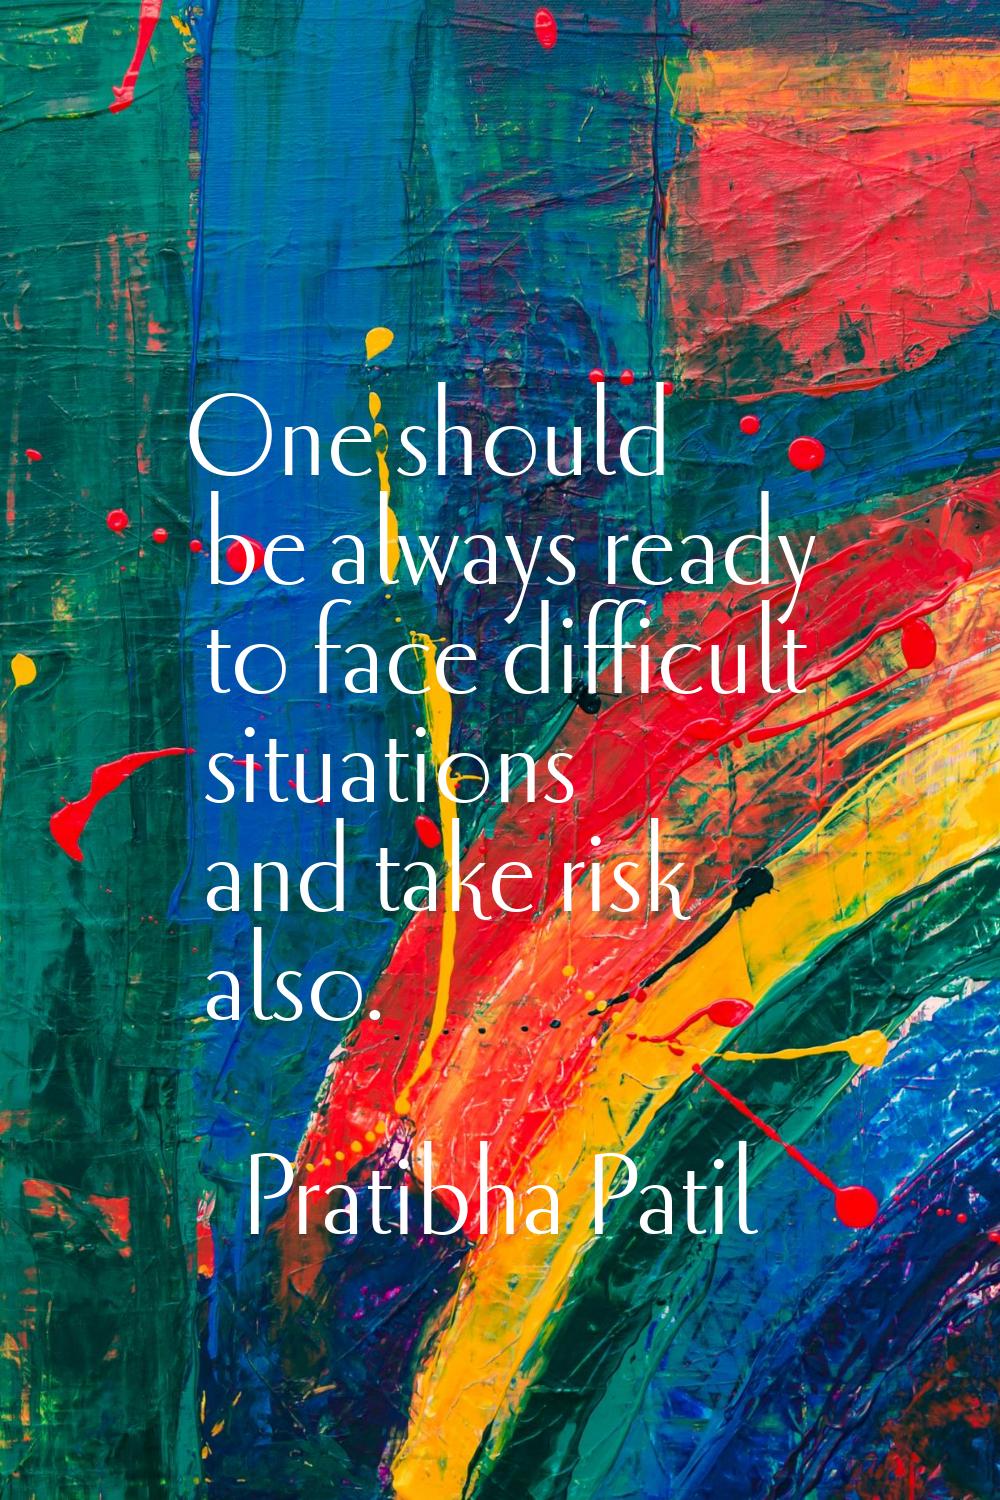 One should be always ready to face difficult situations and take risk also.